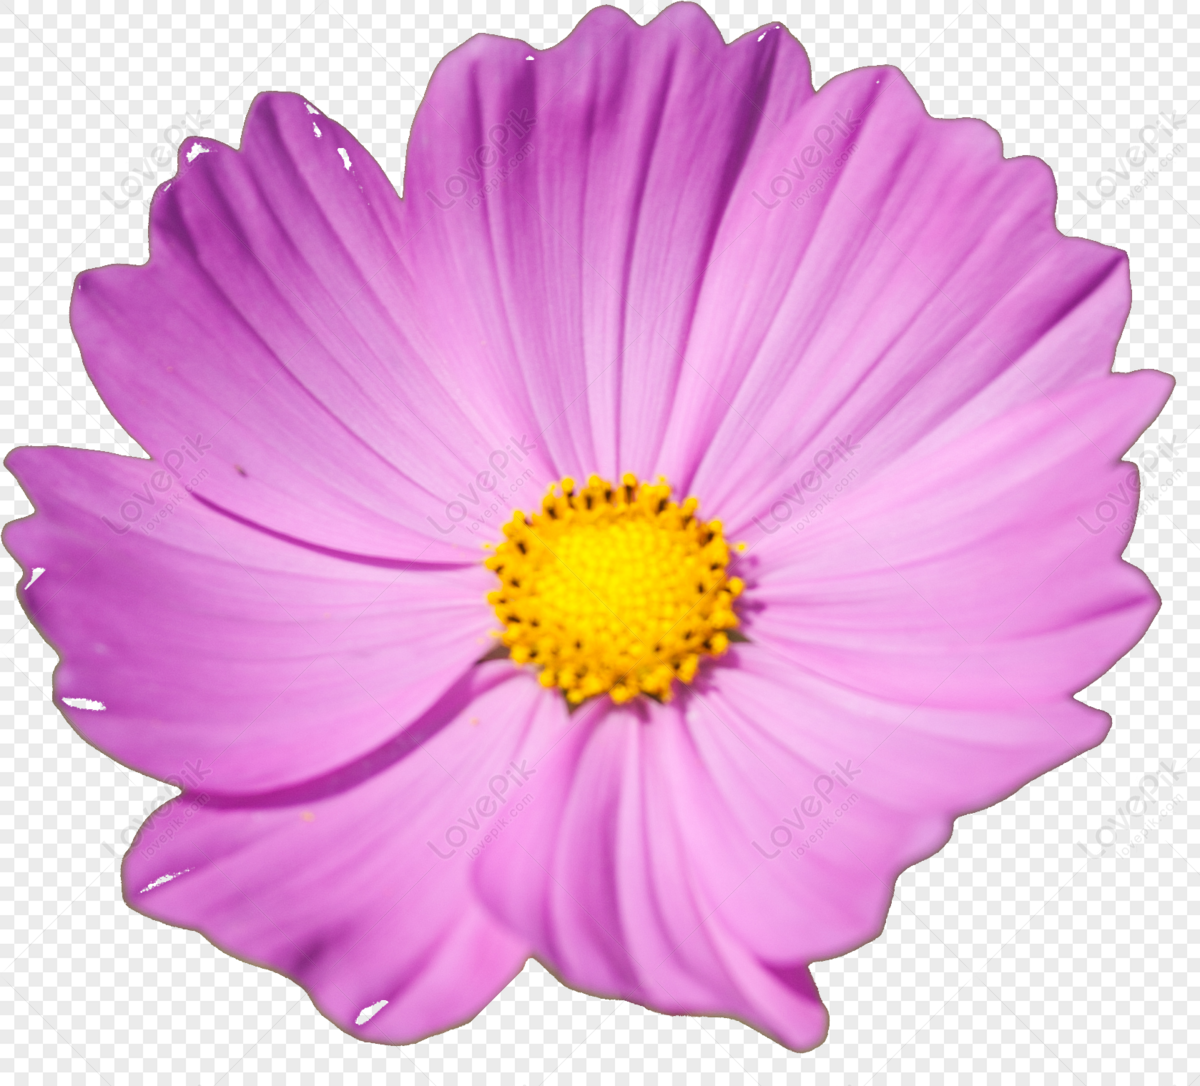 flower-cosmos-flower-flower-white-one-flower-png-free-download-and